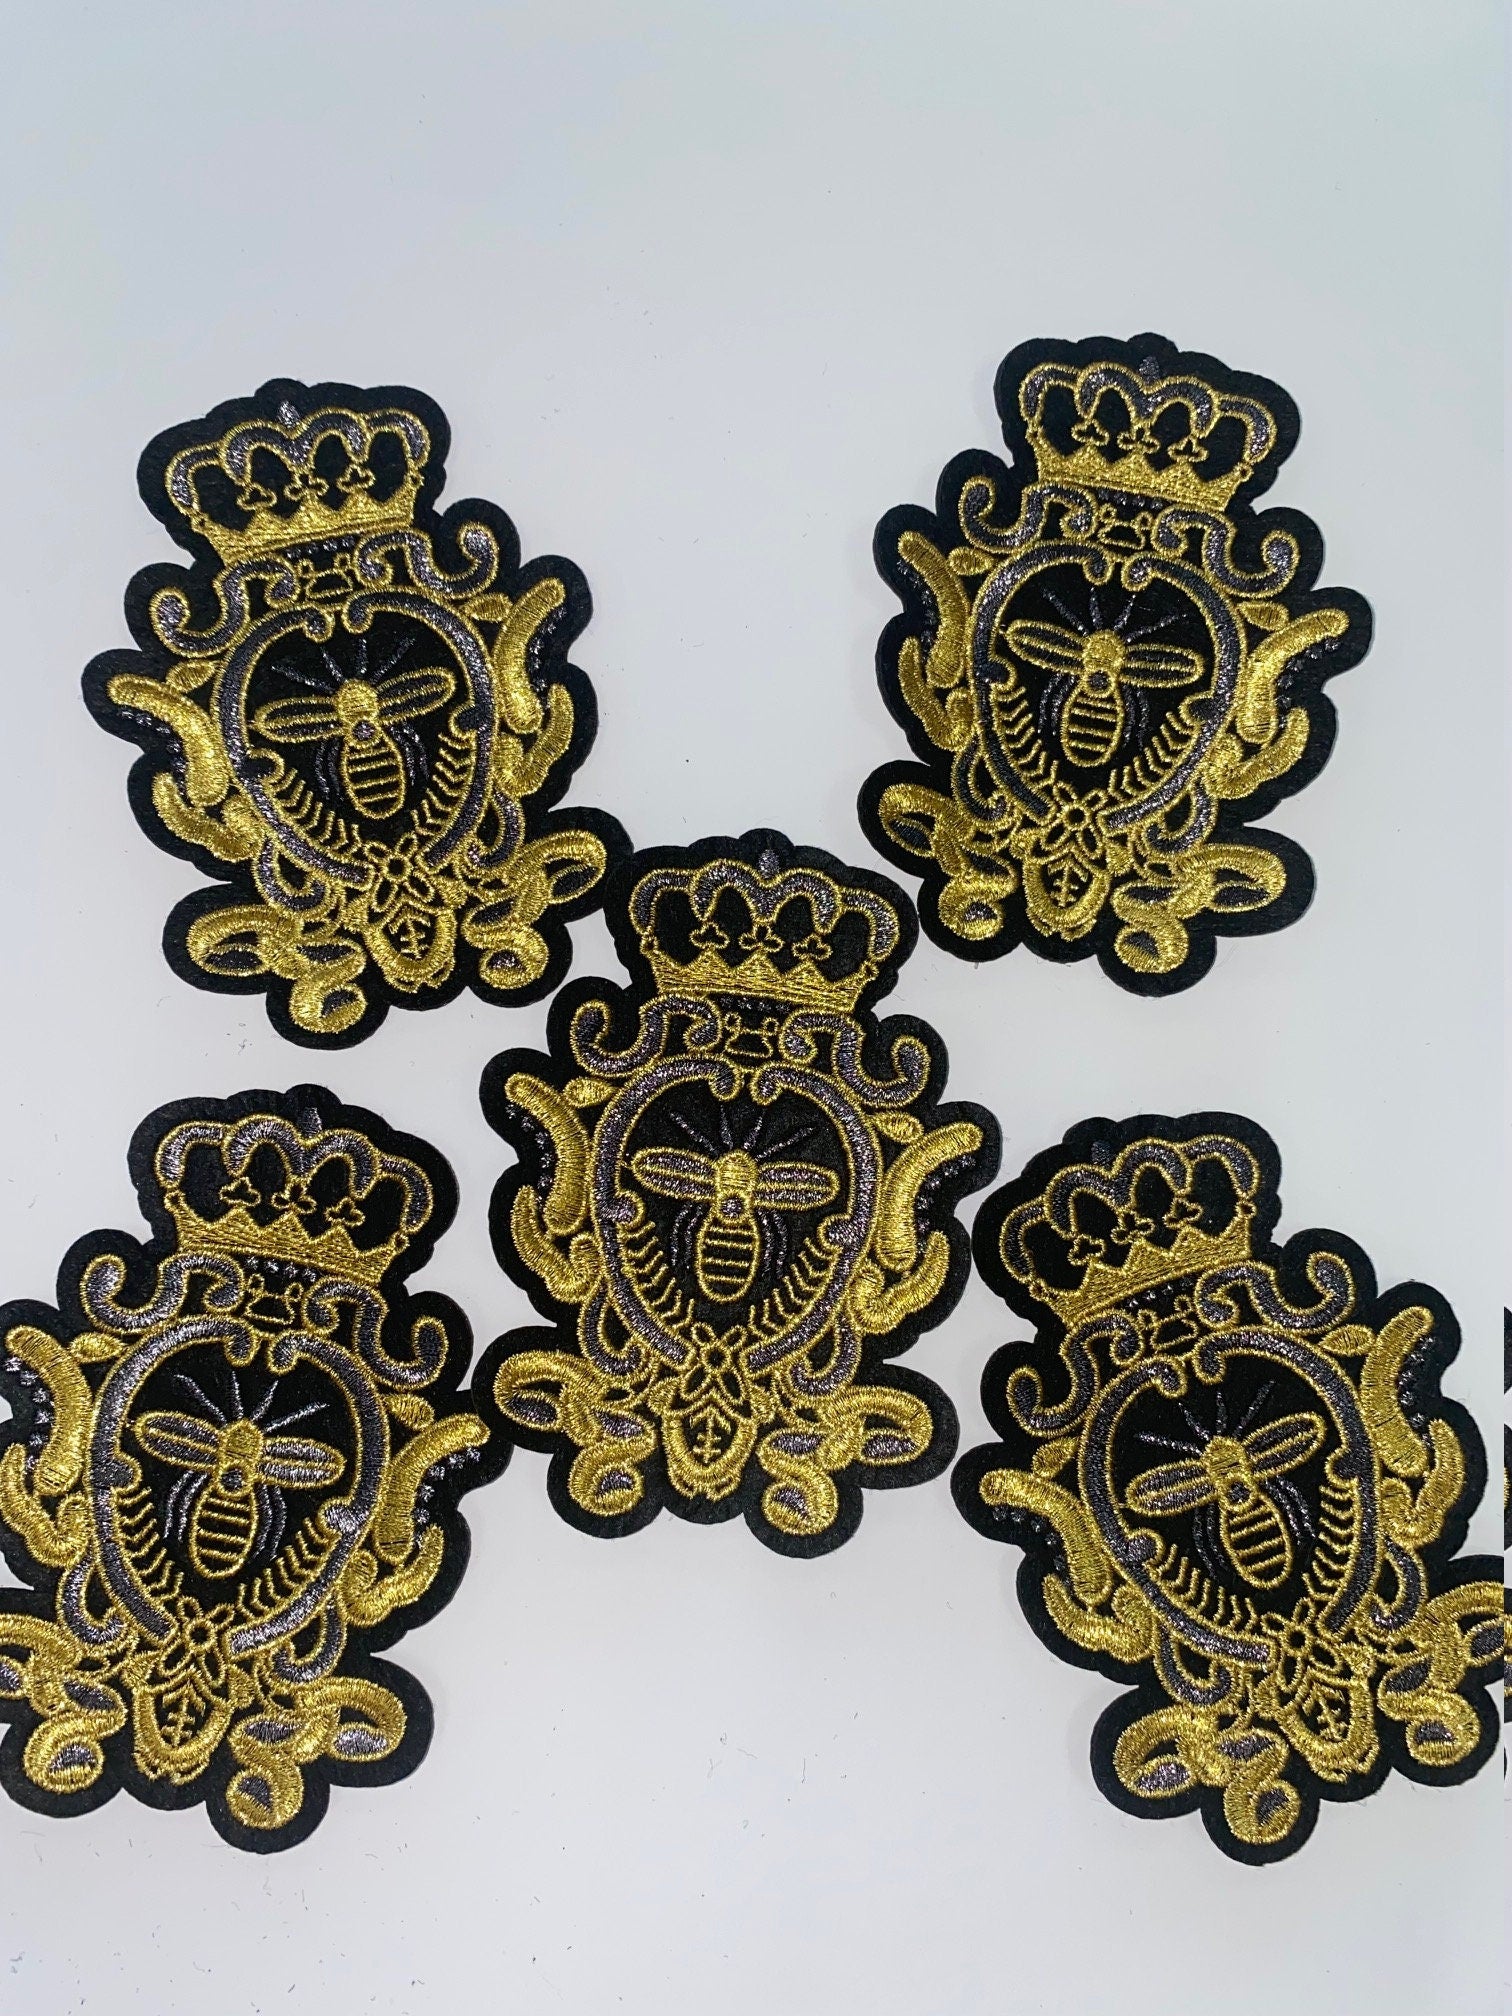 Metallic Gold, Black & Gray Royal Bee Crest, With Crown Emblem Patch, Embroidered Applique Iron On Patch, Size 3", Patch for Hats, Men Patch